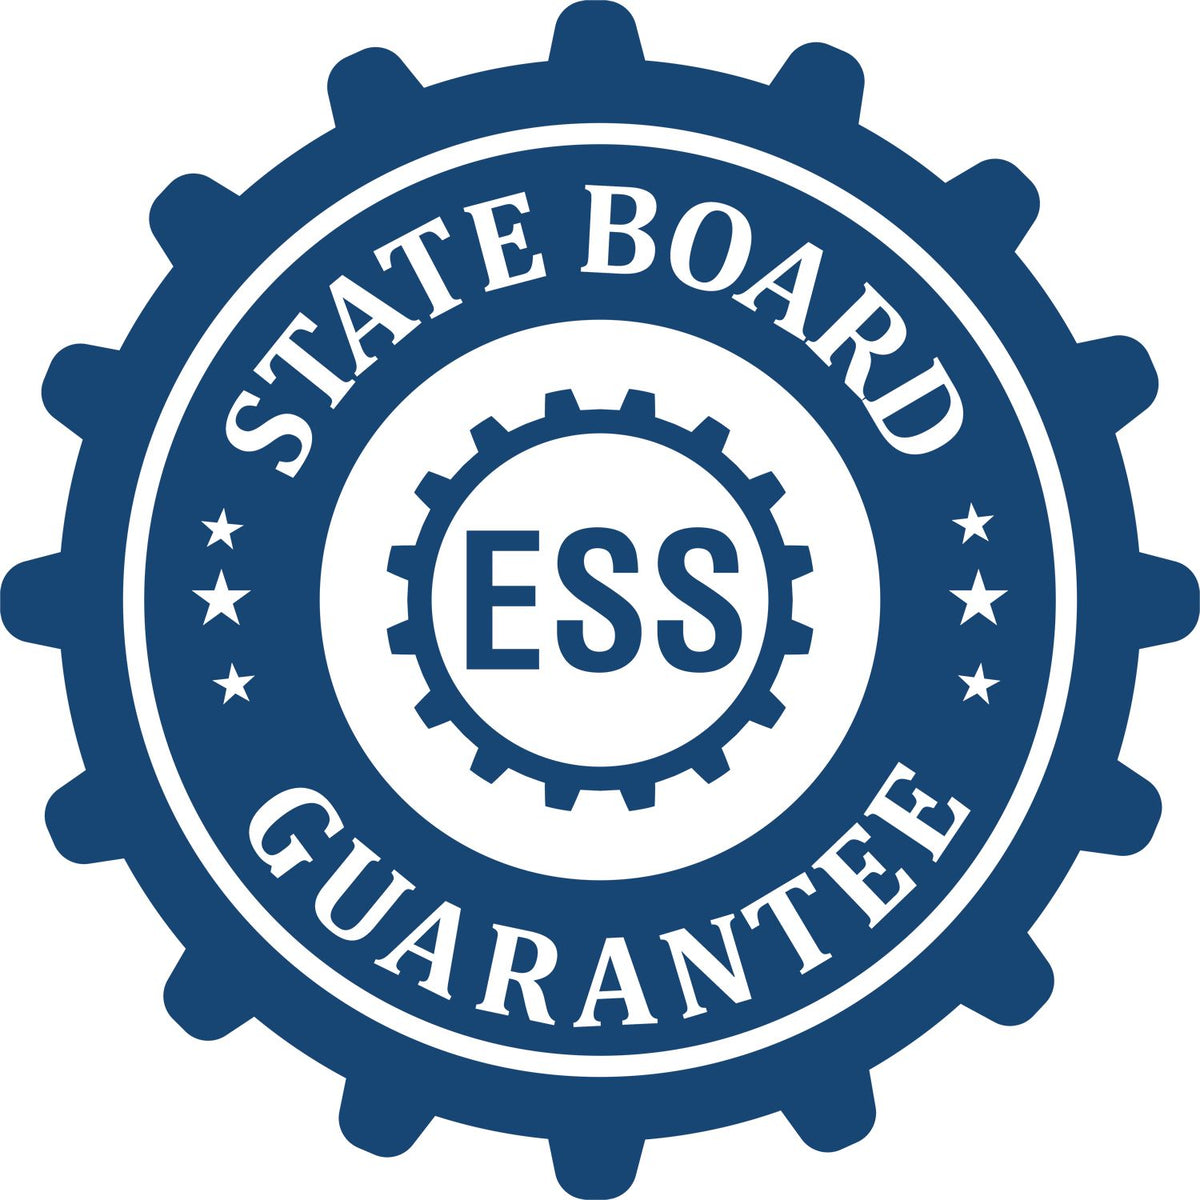 An emblem in a gear shape illustrating a state board guarantee for the Minnesota Desk Architect Embossing Seal product.